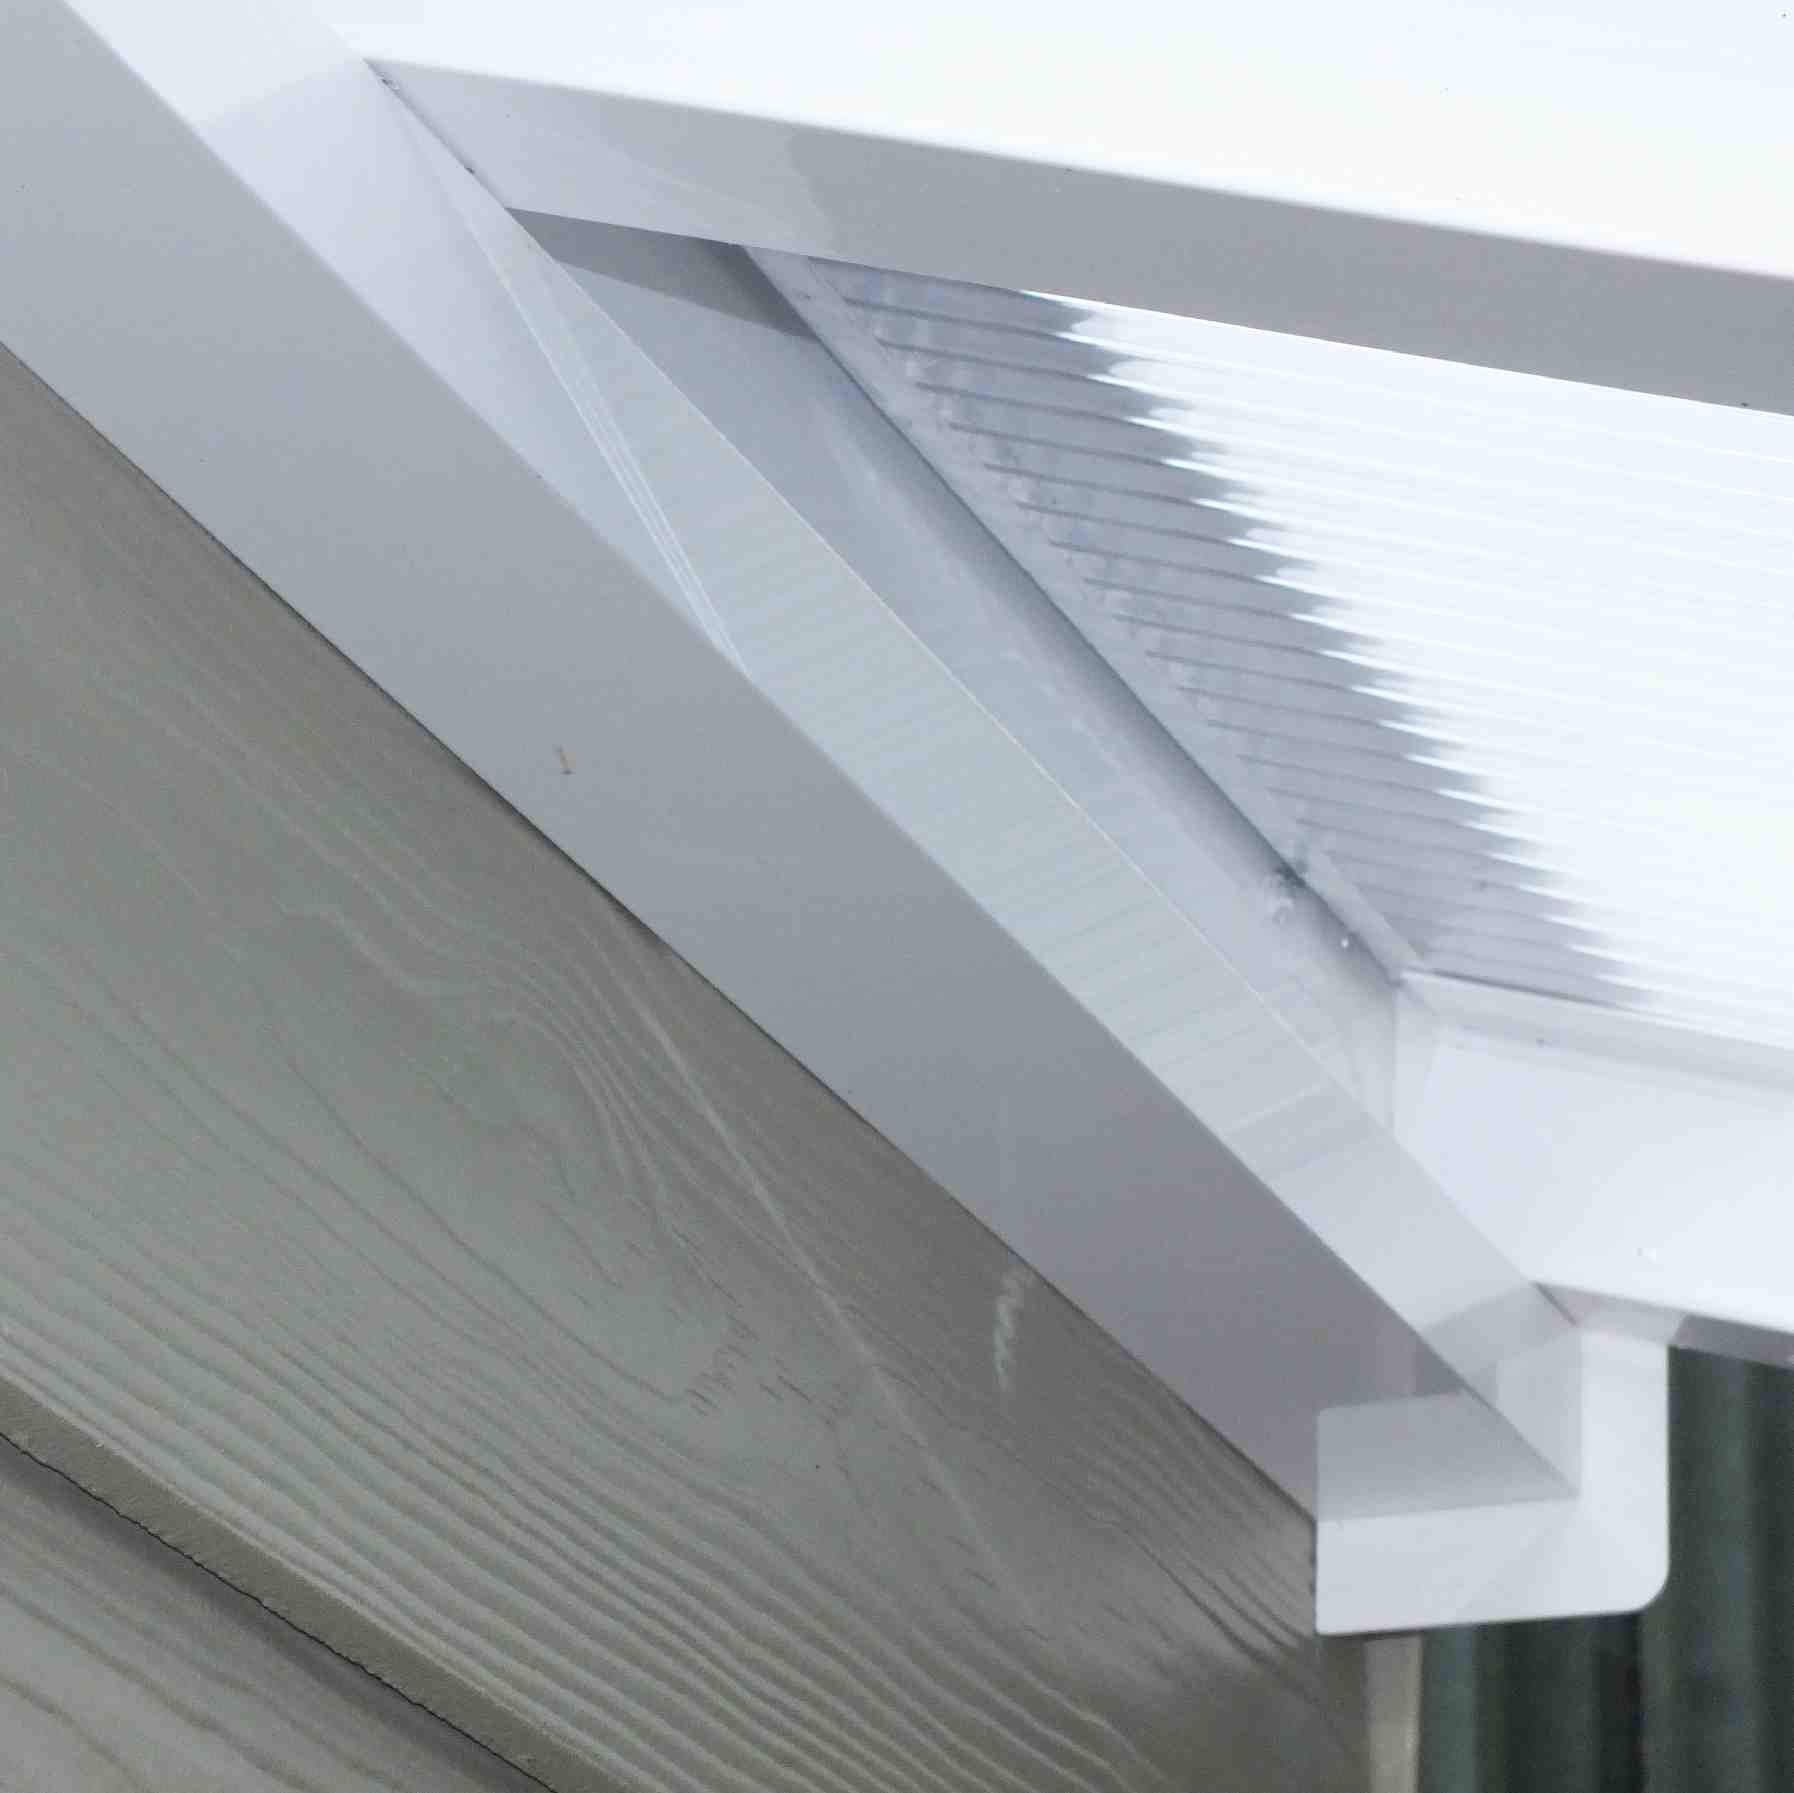 Great deals on Omega Verandah White with 16mm Polycarbonate Glazing - 7.4m (W) x 1.5m (P), (4) Supporting Posts